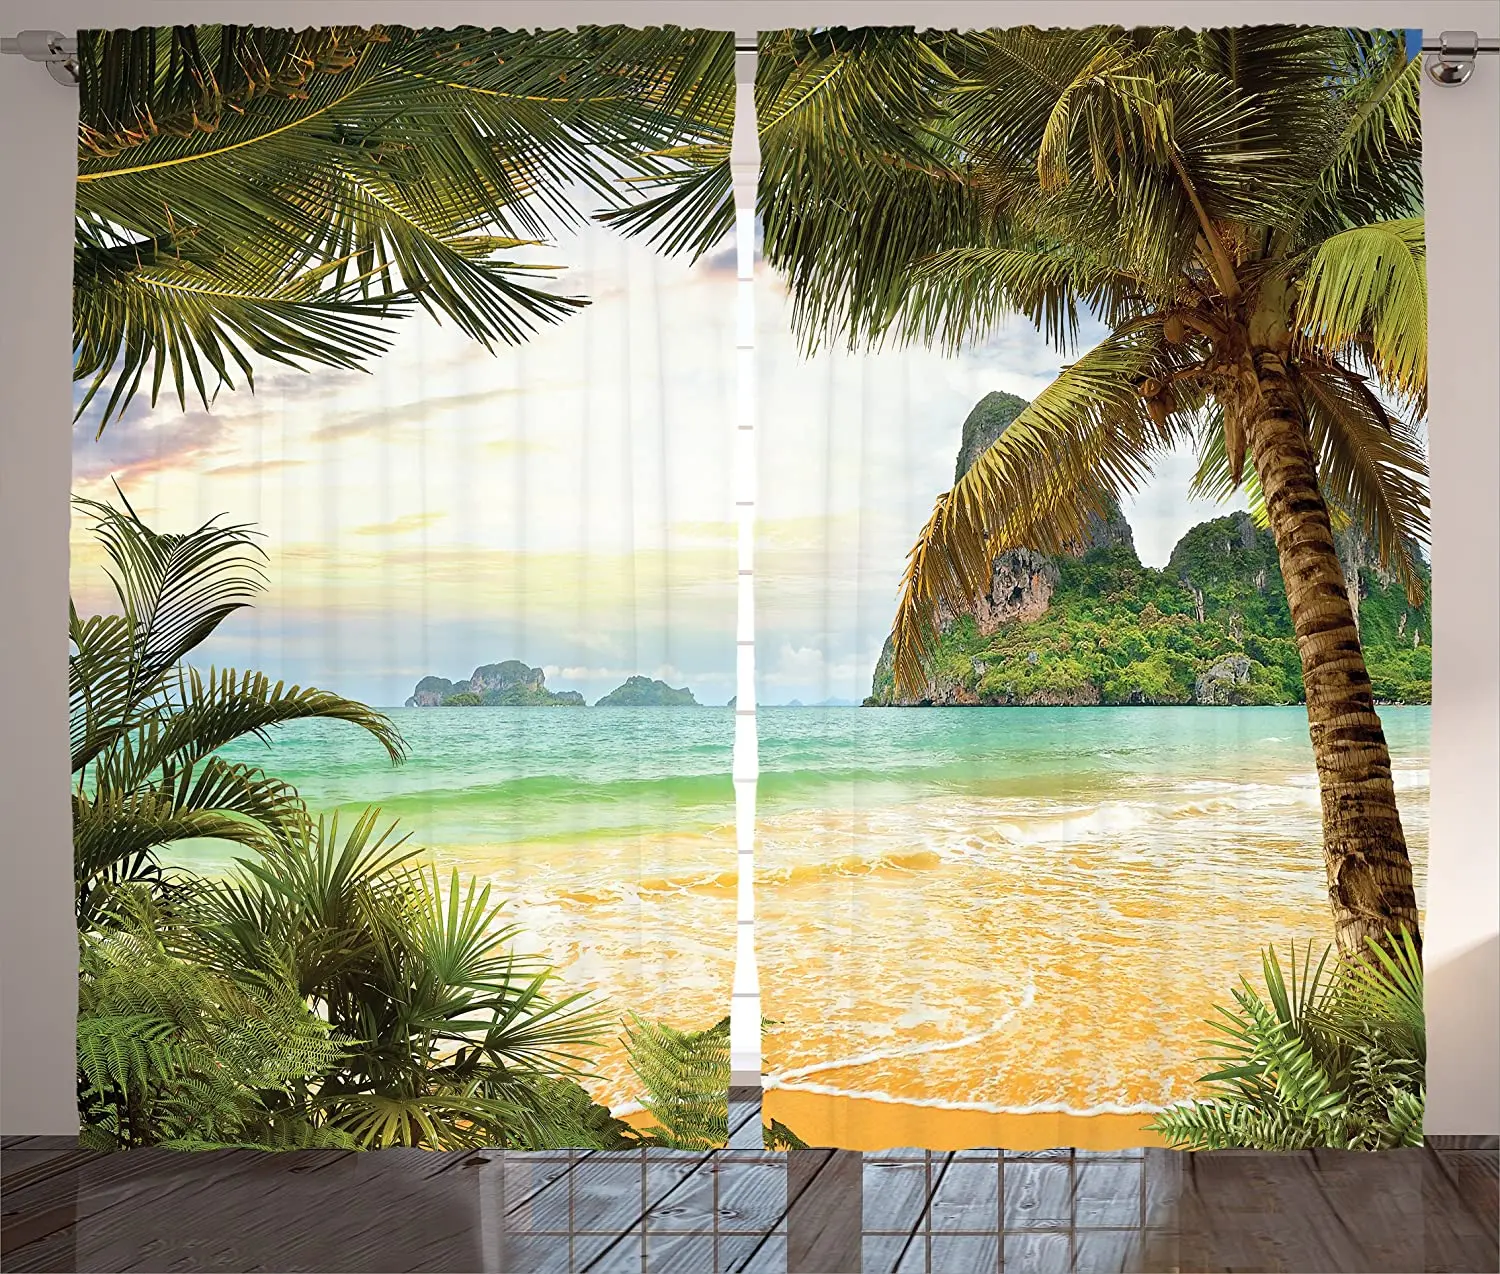 

Ocean Curtains Palm Coconut Trees and Ocean Waves Across Mountains On Paradise Island Beach Image Living Room Bedroom Decor